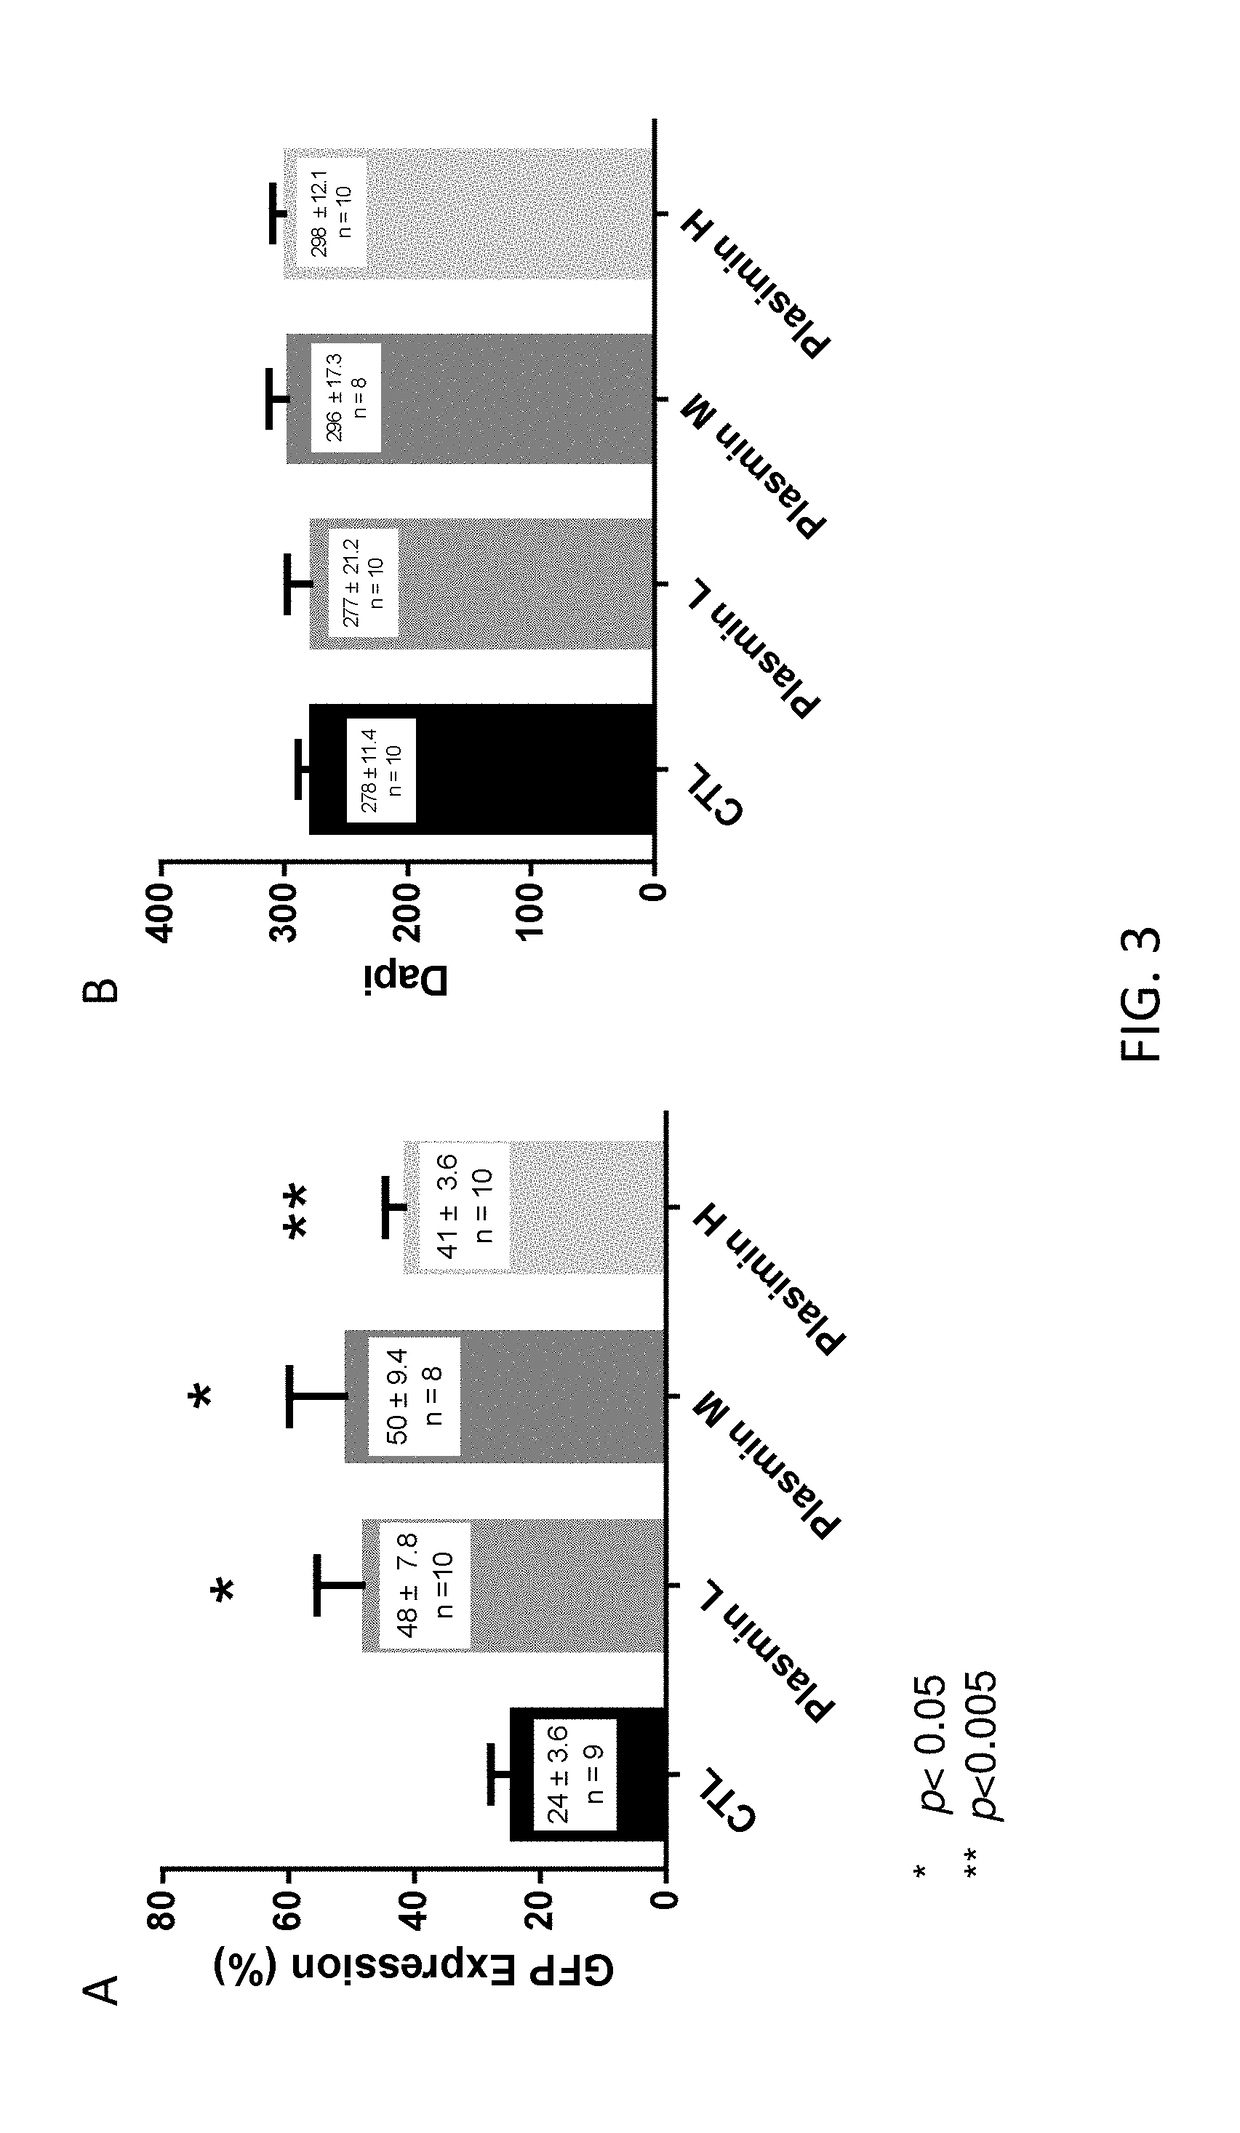 Method of Enhancing Delivery of Therapeutic Compounds to the Eye